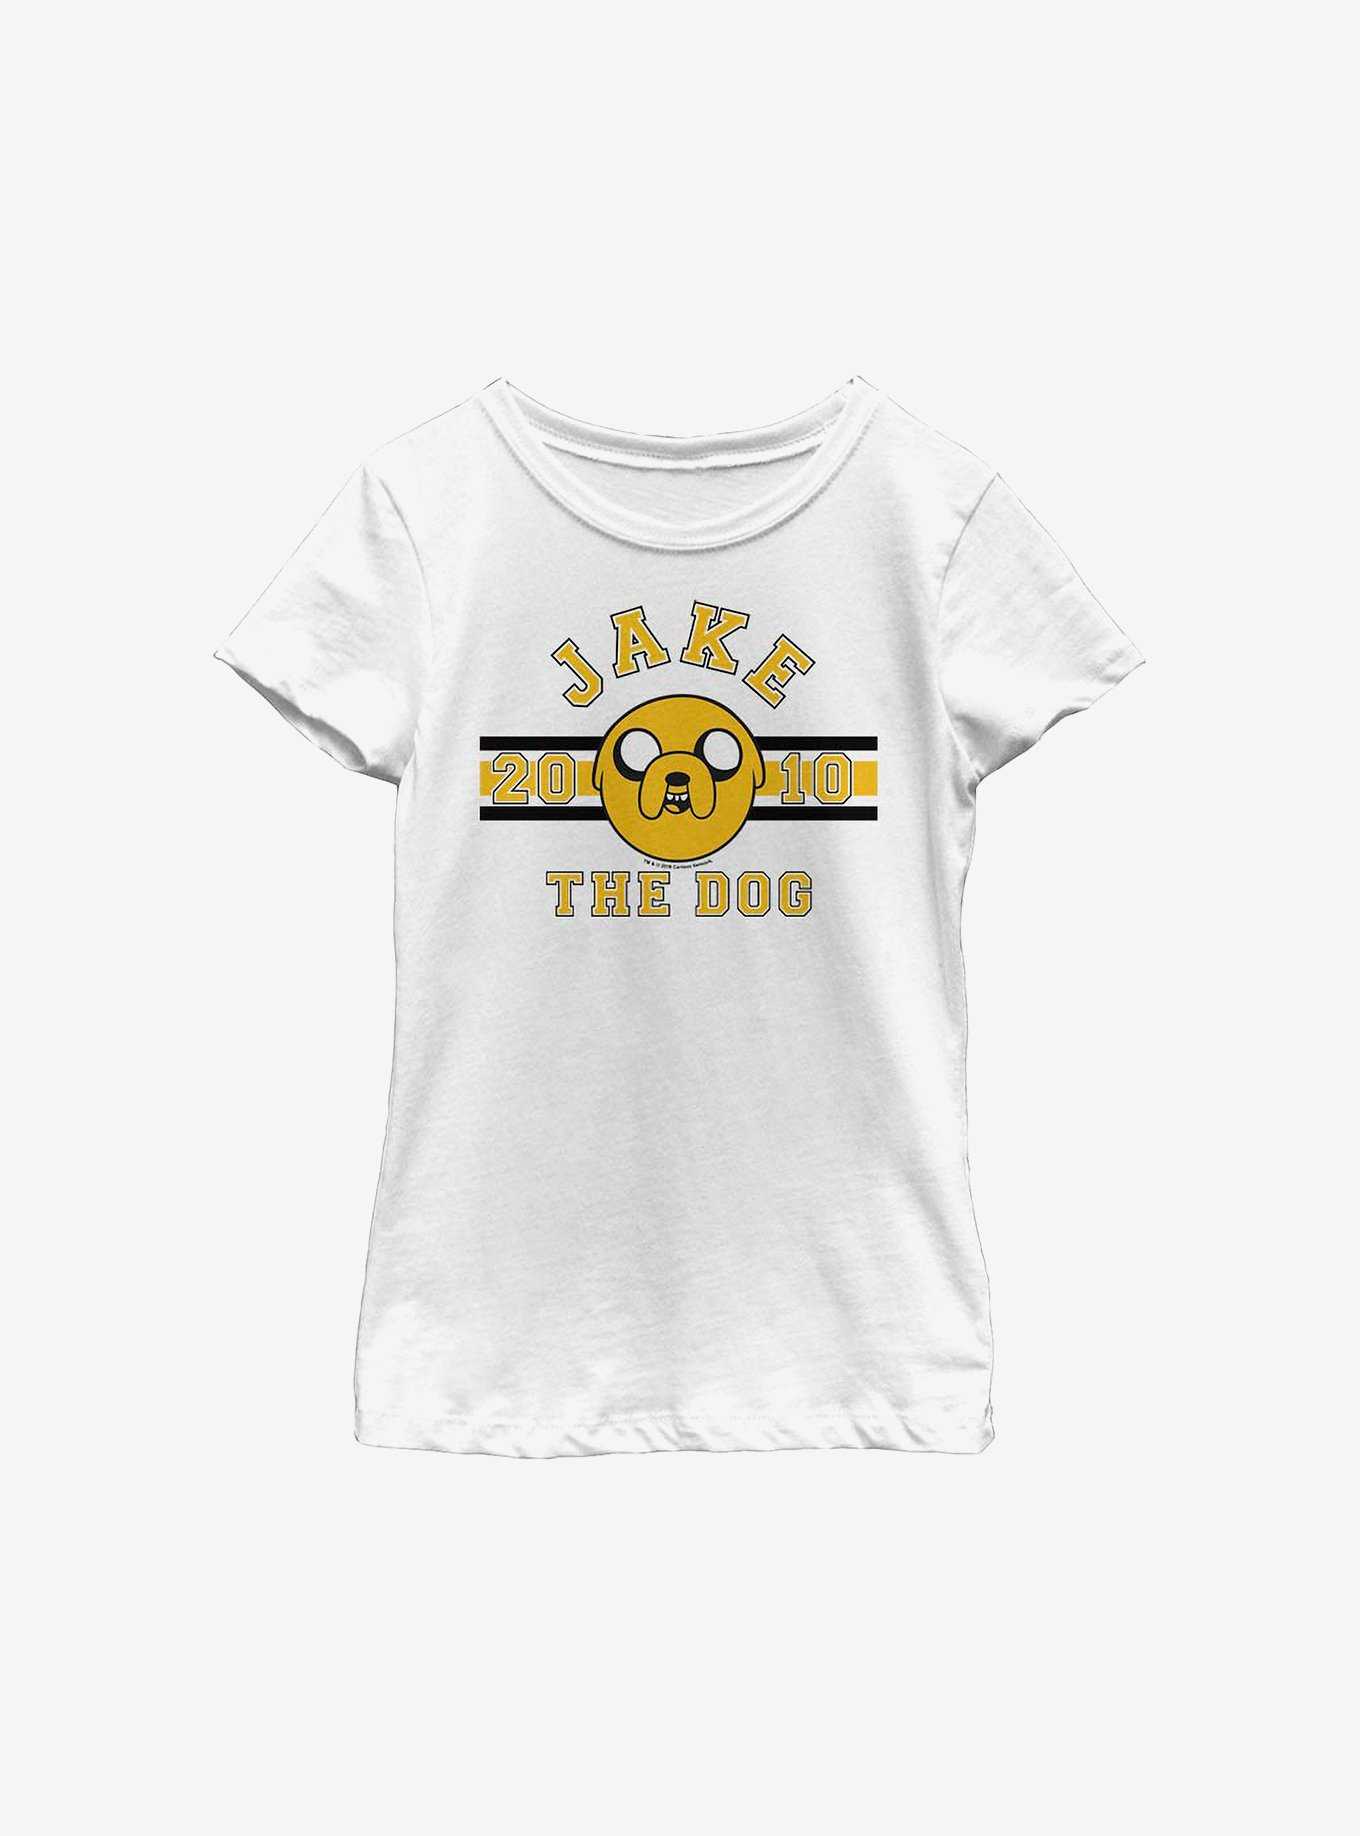 Adventure Time Jake The Dog 2010 Youth Girls T-Shirt, , hi-res